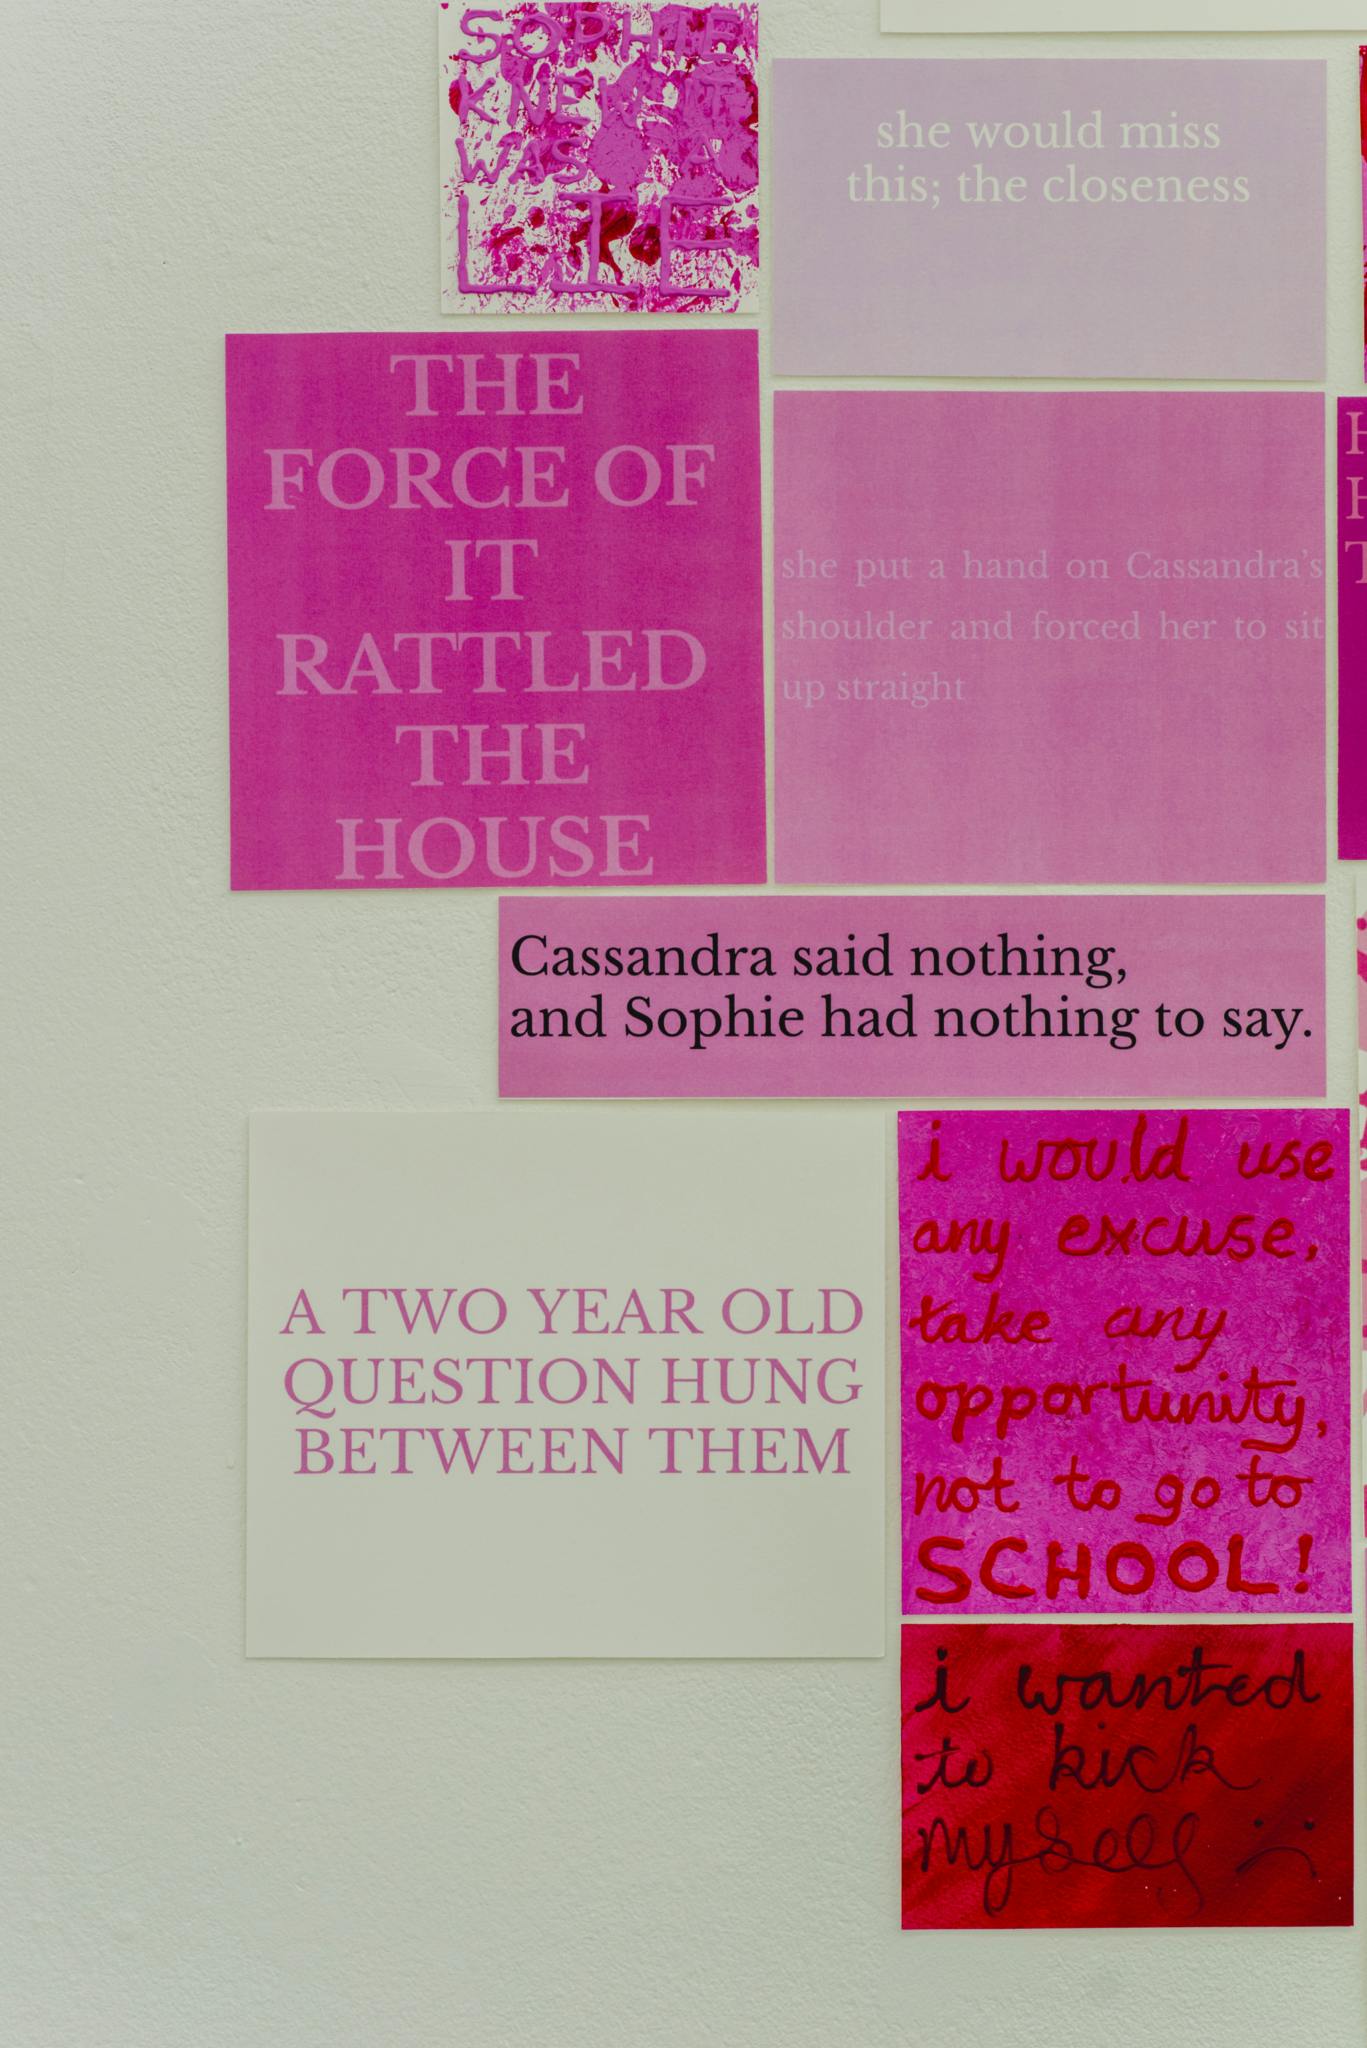 Image shows a wall with a number of pink quote and images on it